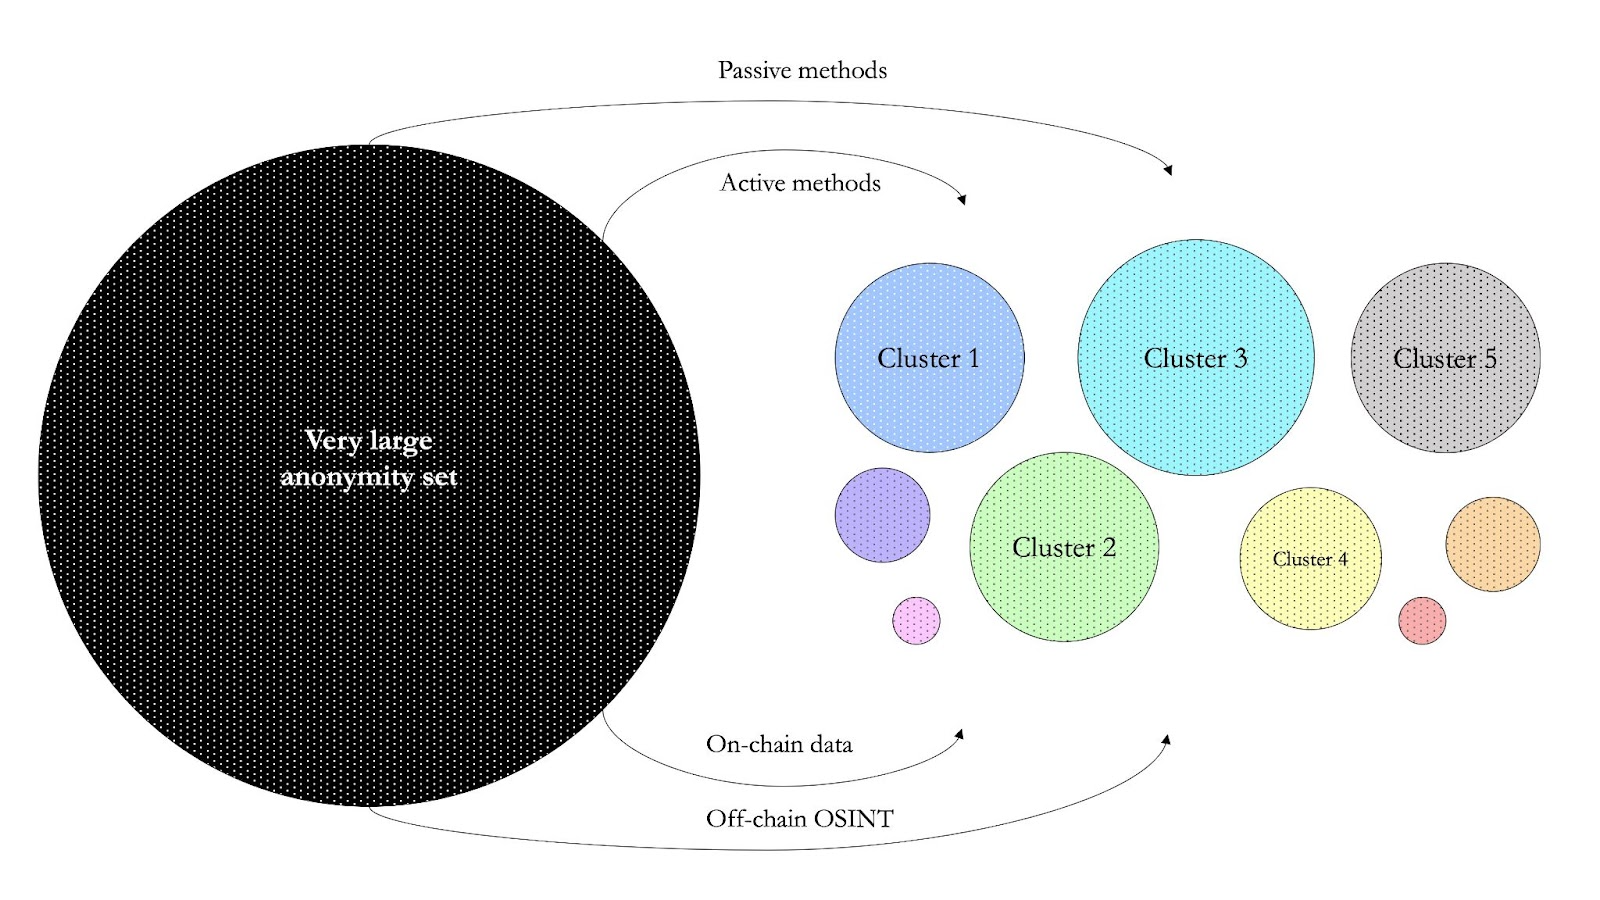 Figure 4: A visual representation of clustering results, every color represents a different kind of entity or activity